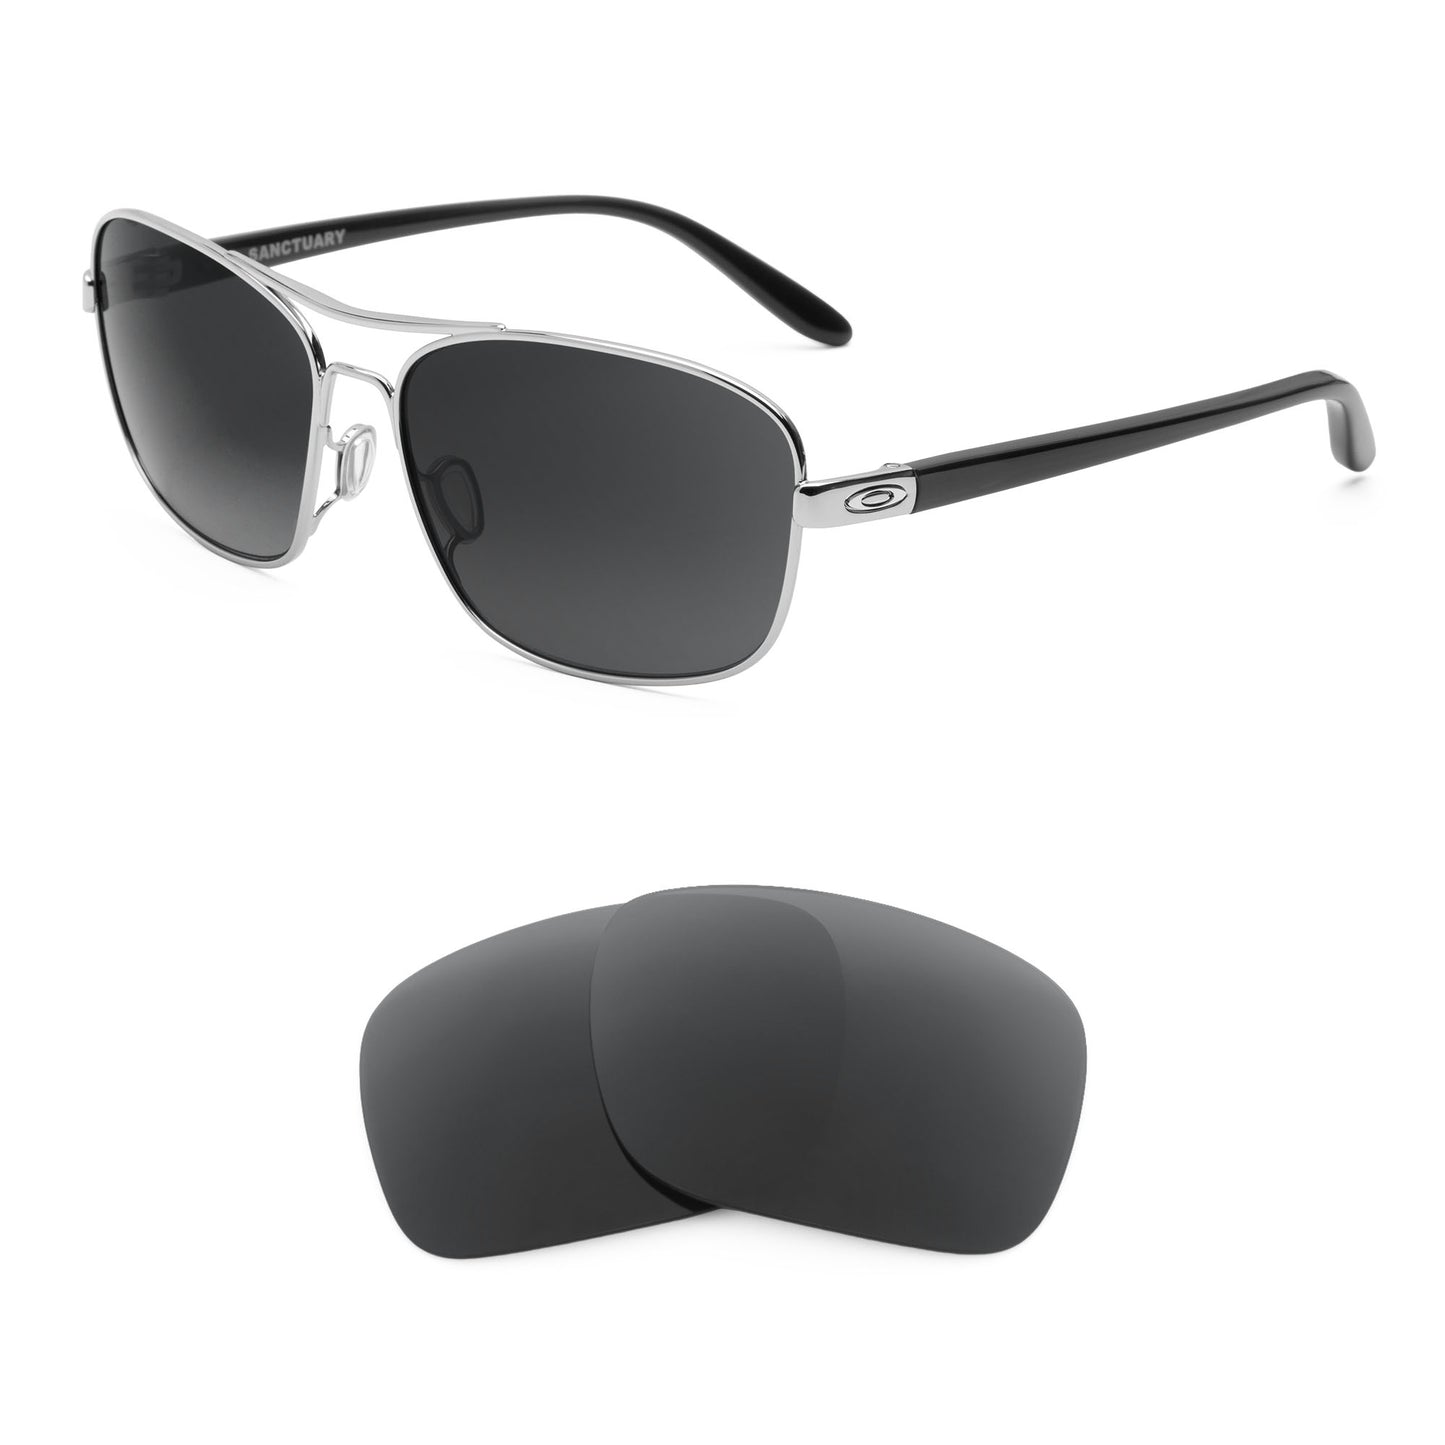 Oakley Sanctuary sunglasses with replacement lenses